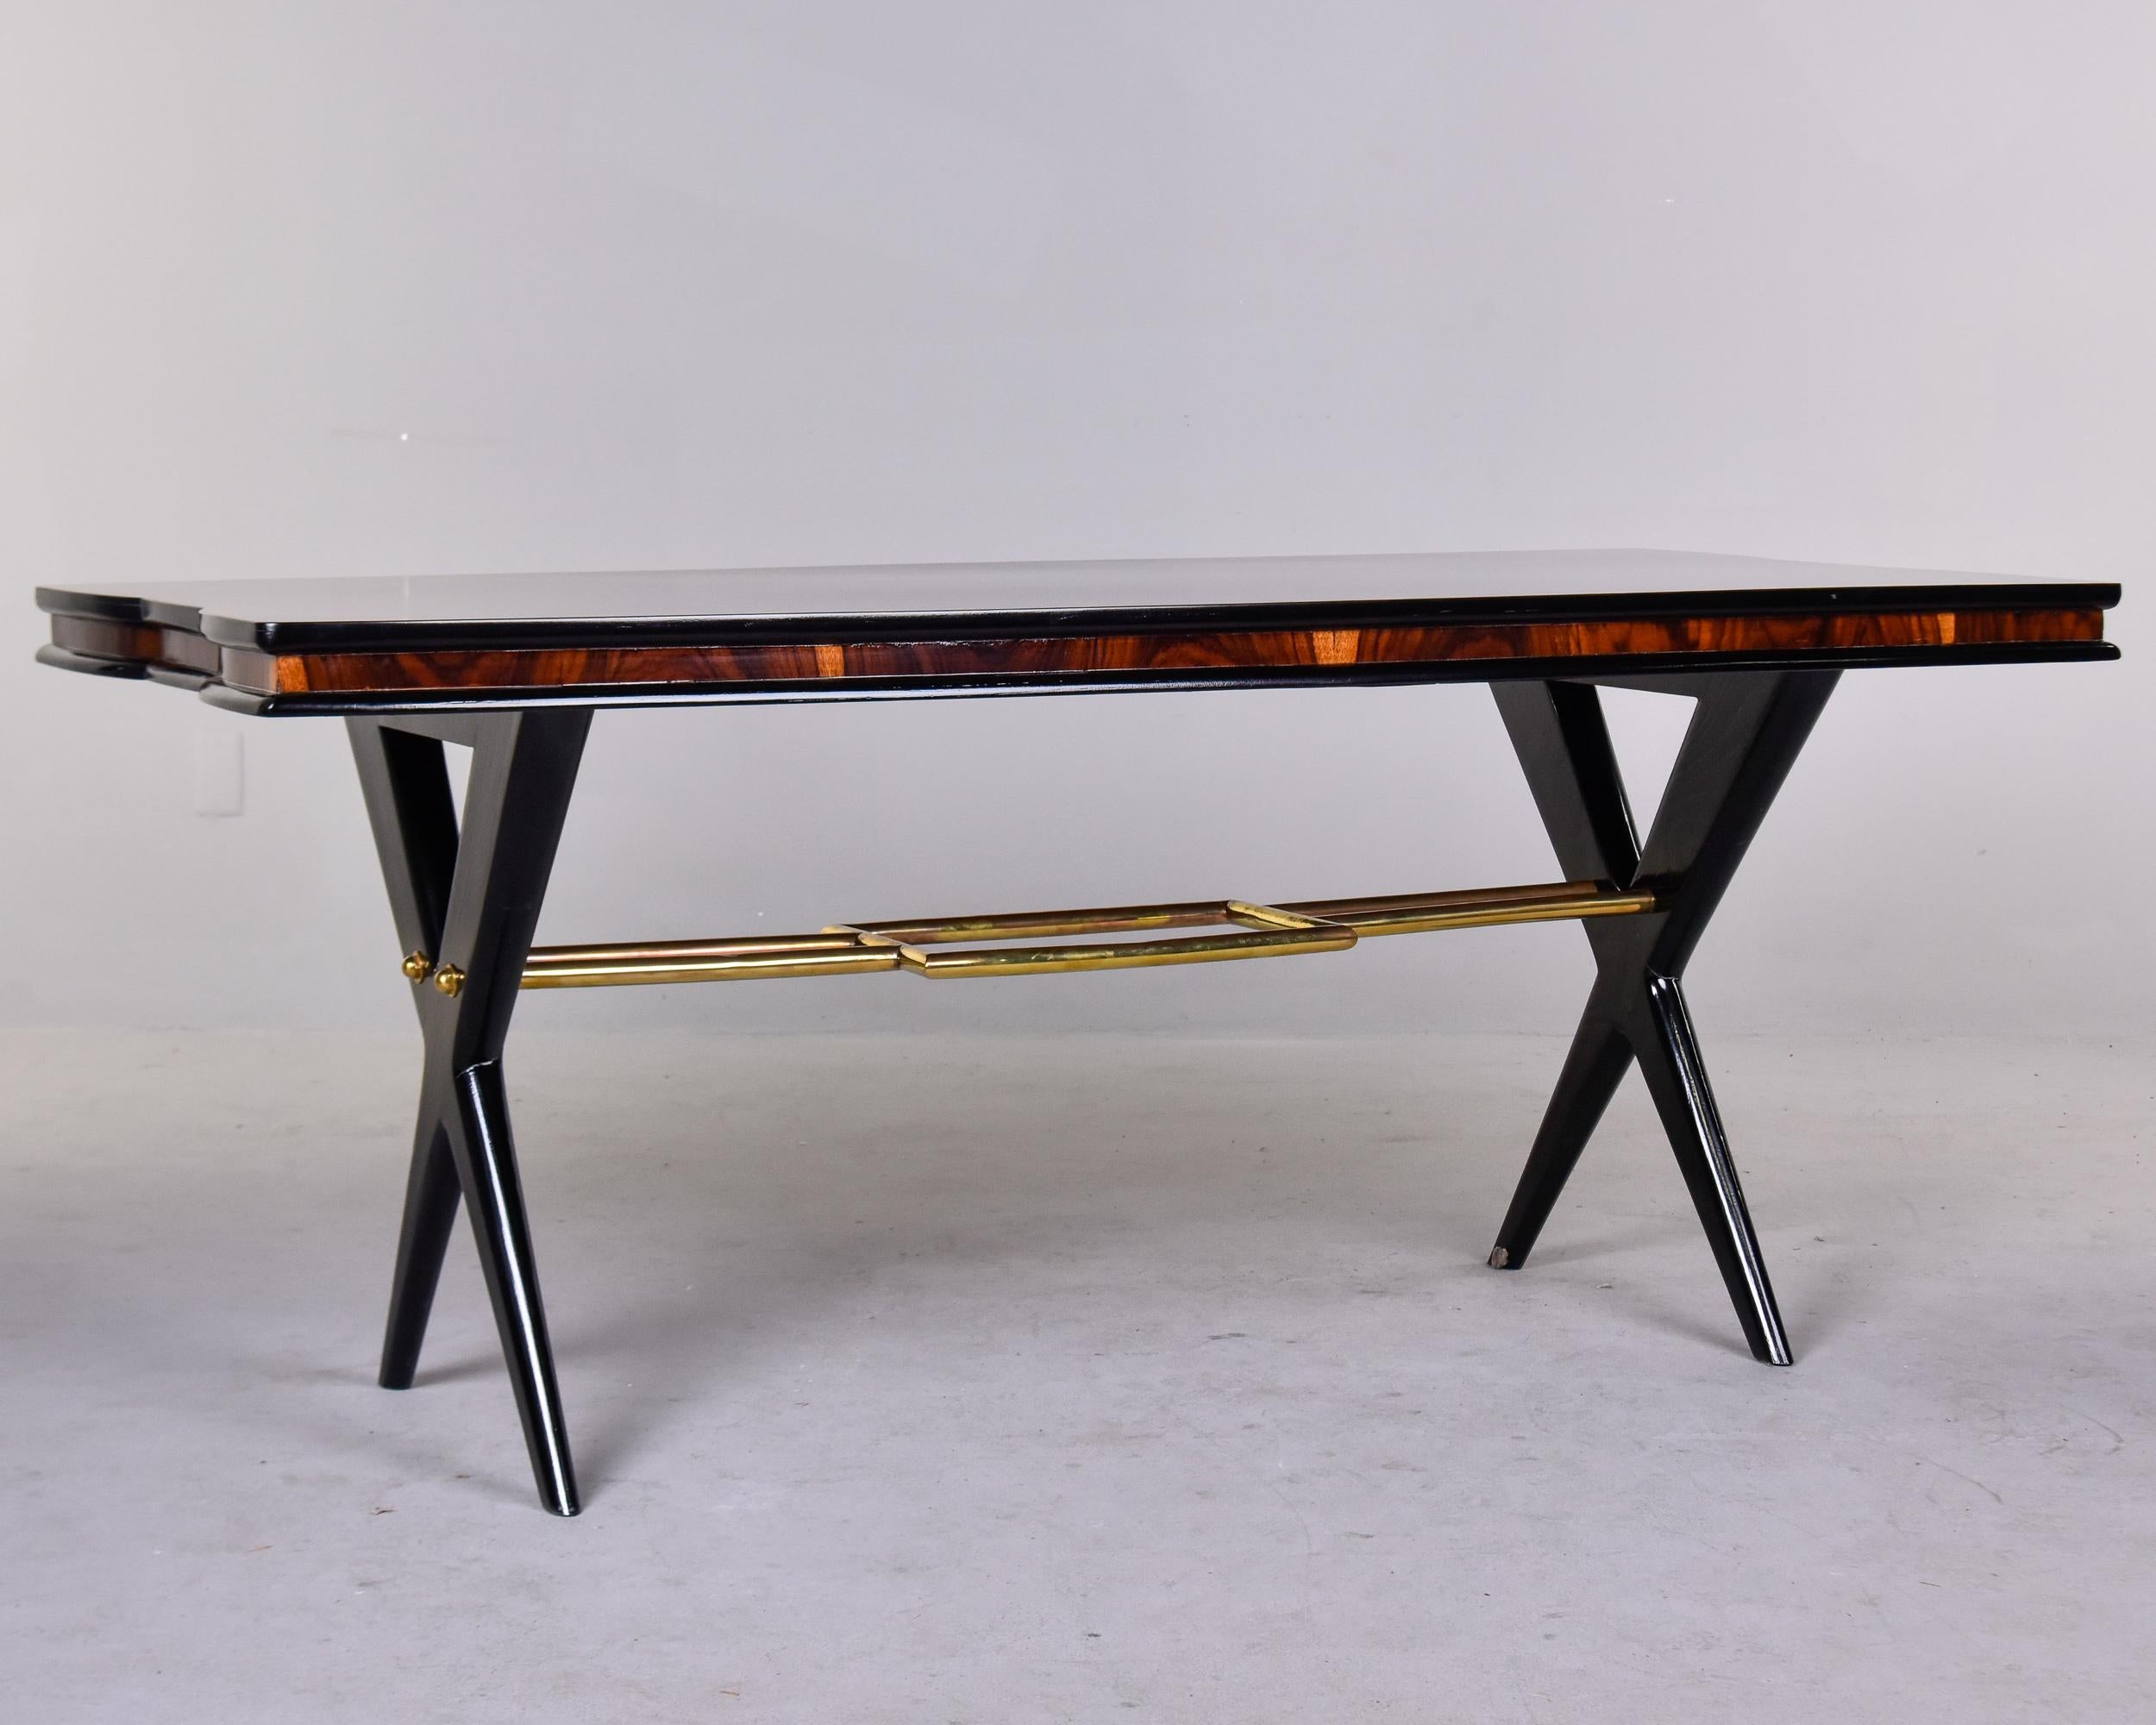 20th Century Art Deco Italian Rosewood Dining Table with Decorative Brass Stretcher For Sale